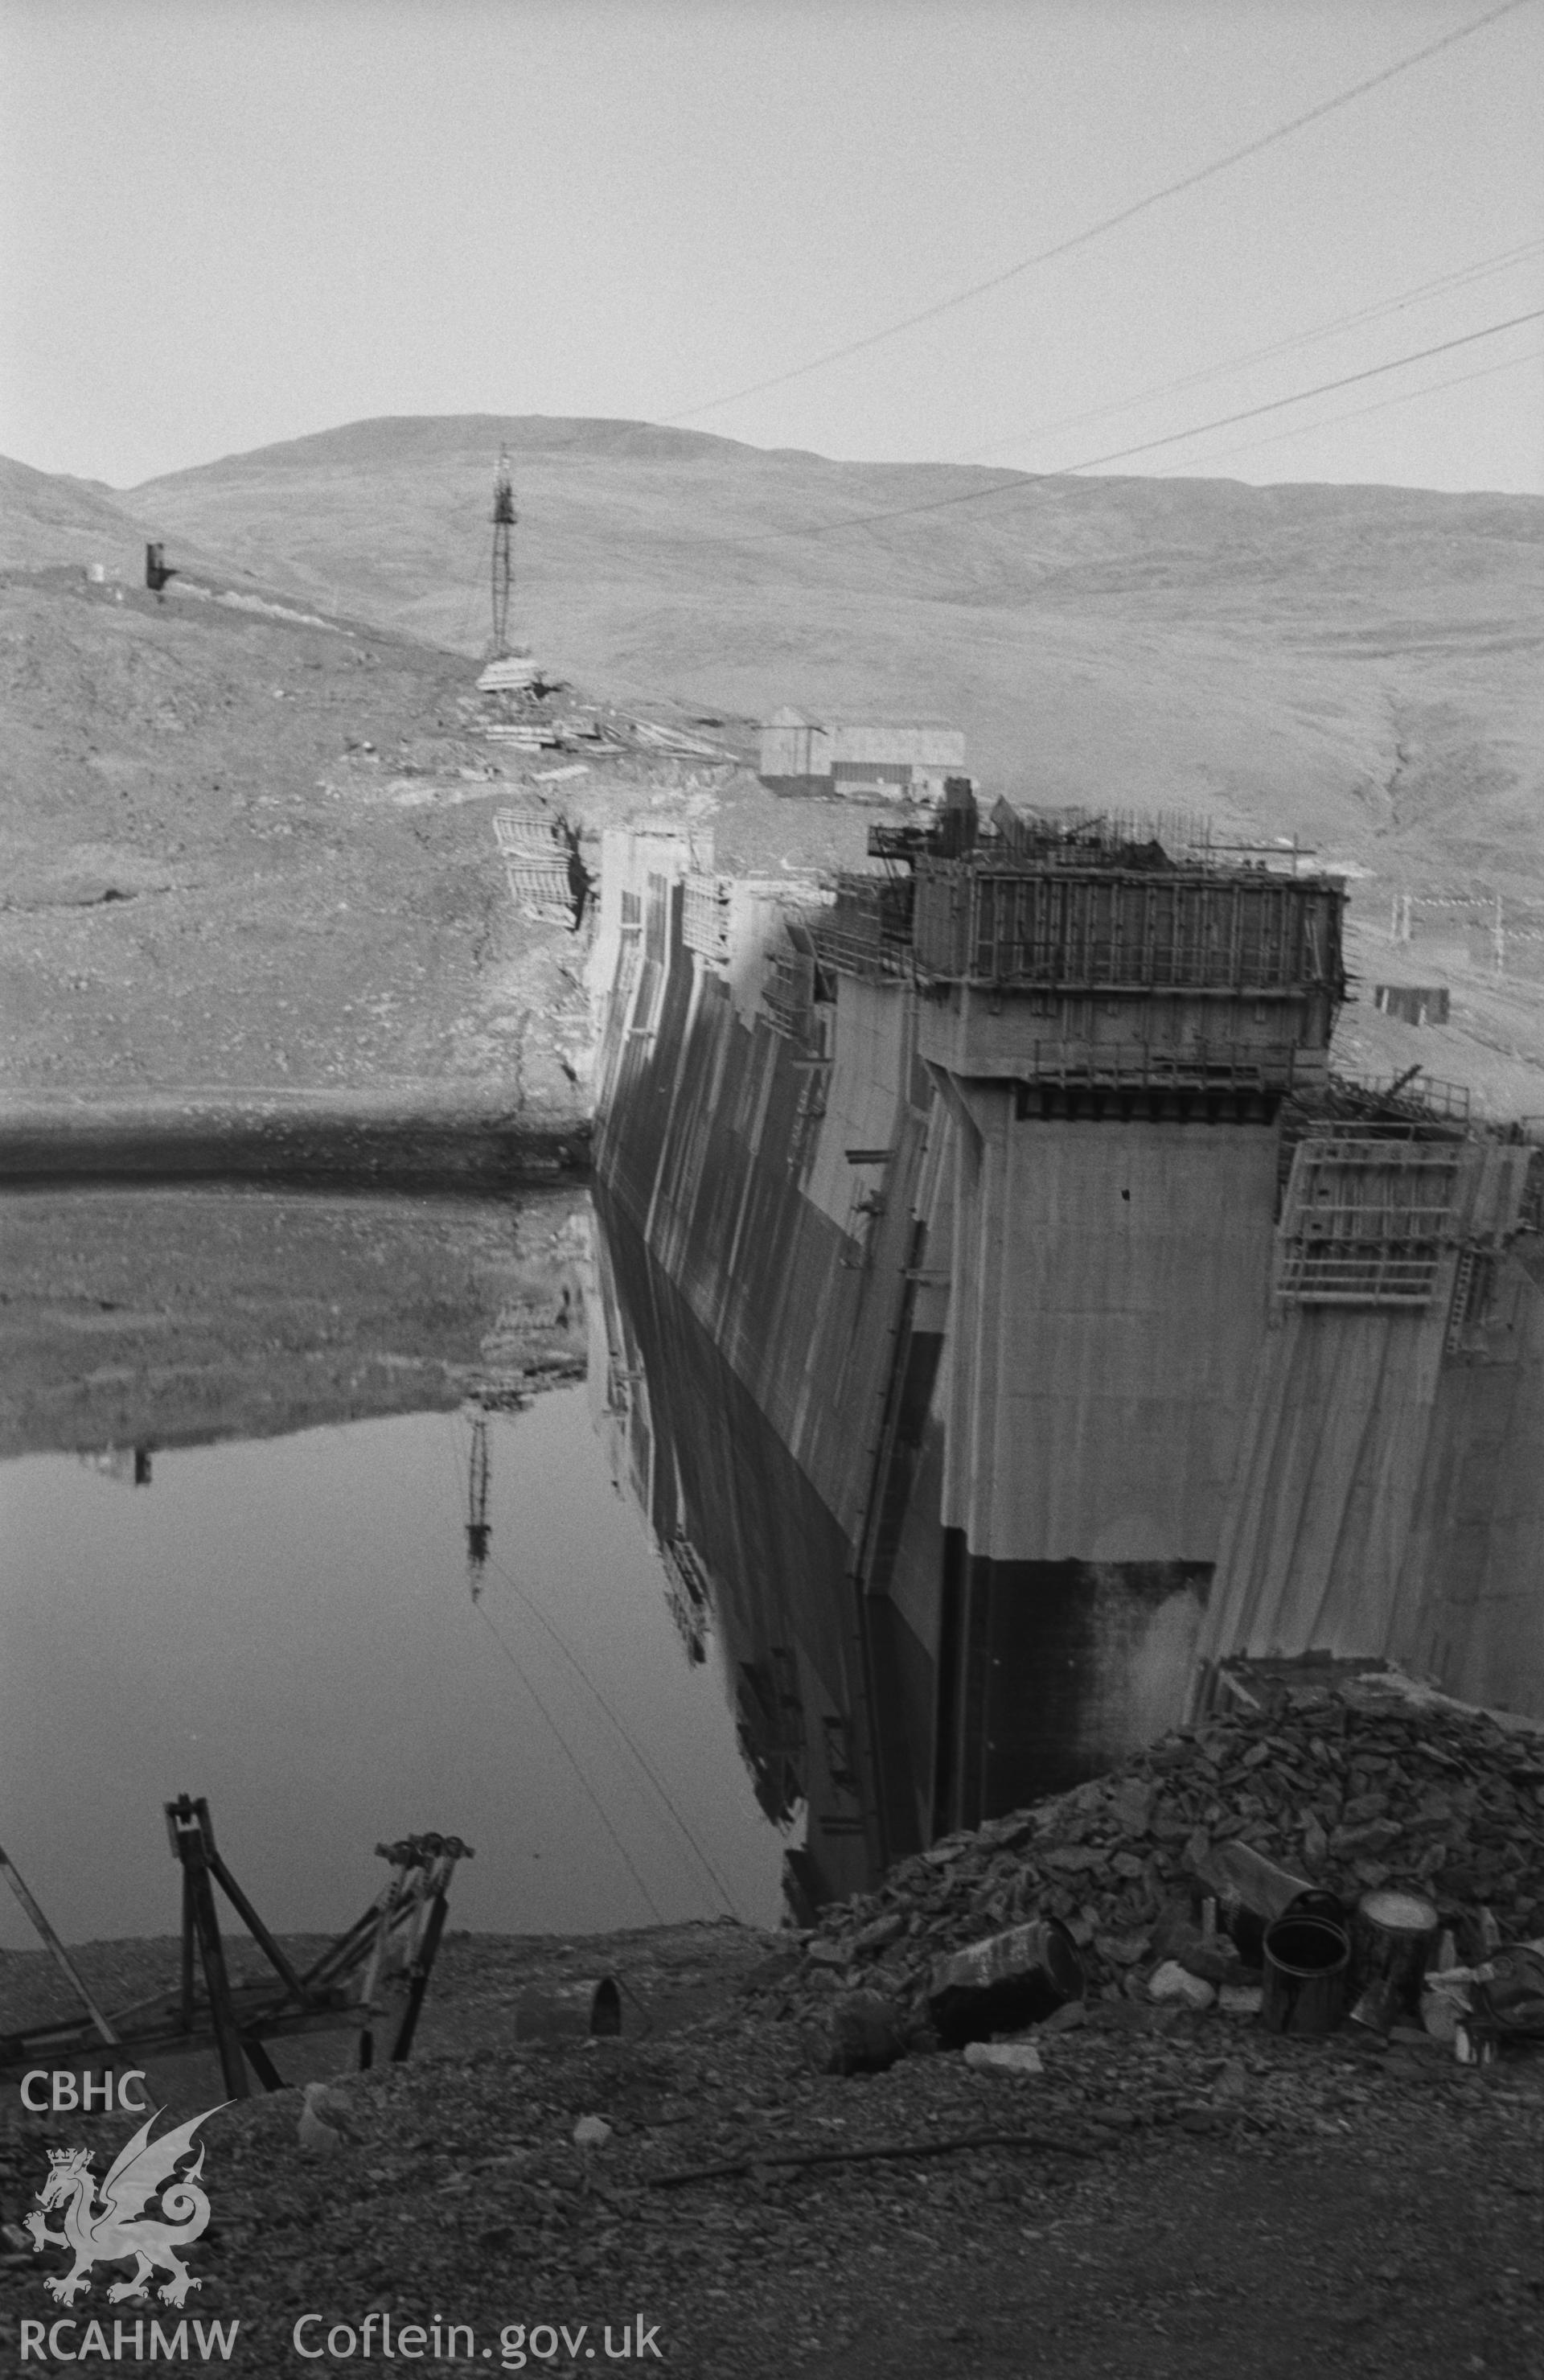 Black and White photograph showing Nant-y-Moch dam under construction. Photographed by Arthur Chater in April 1962 from Grid Reference SN 753 862, looking east.